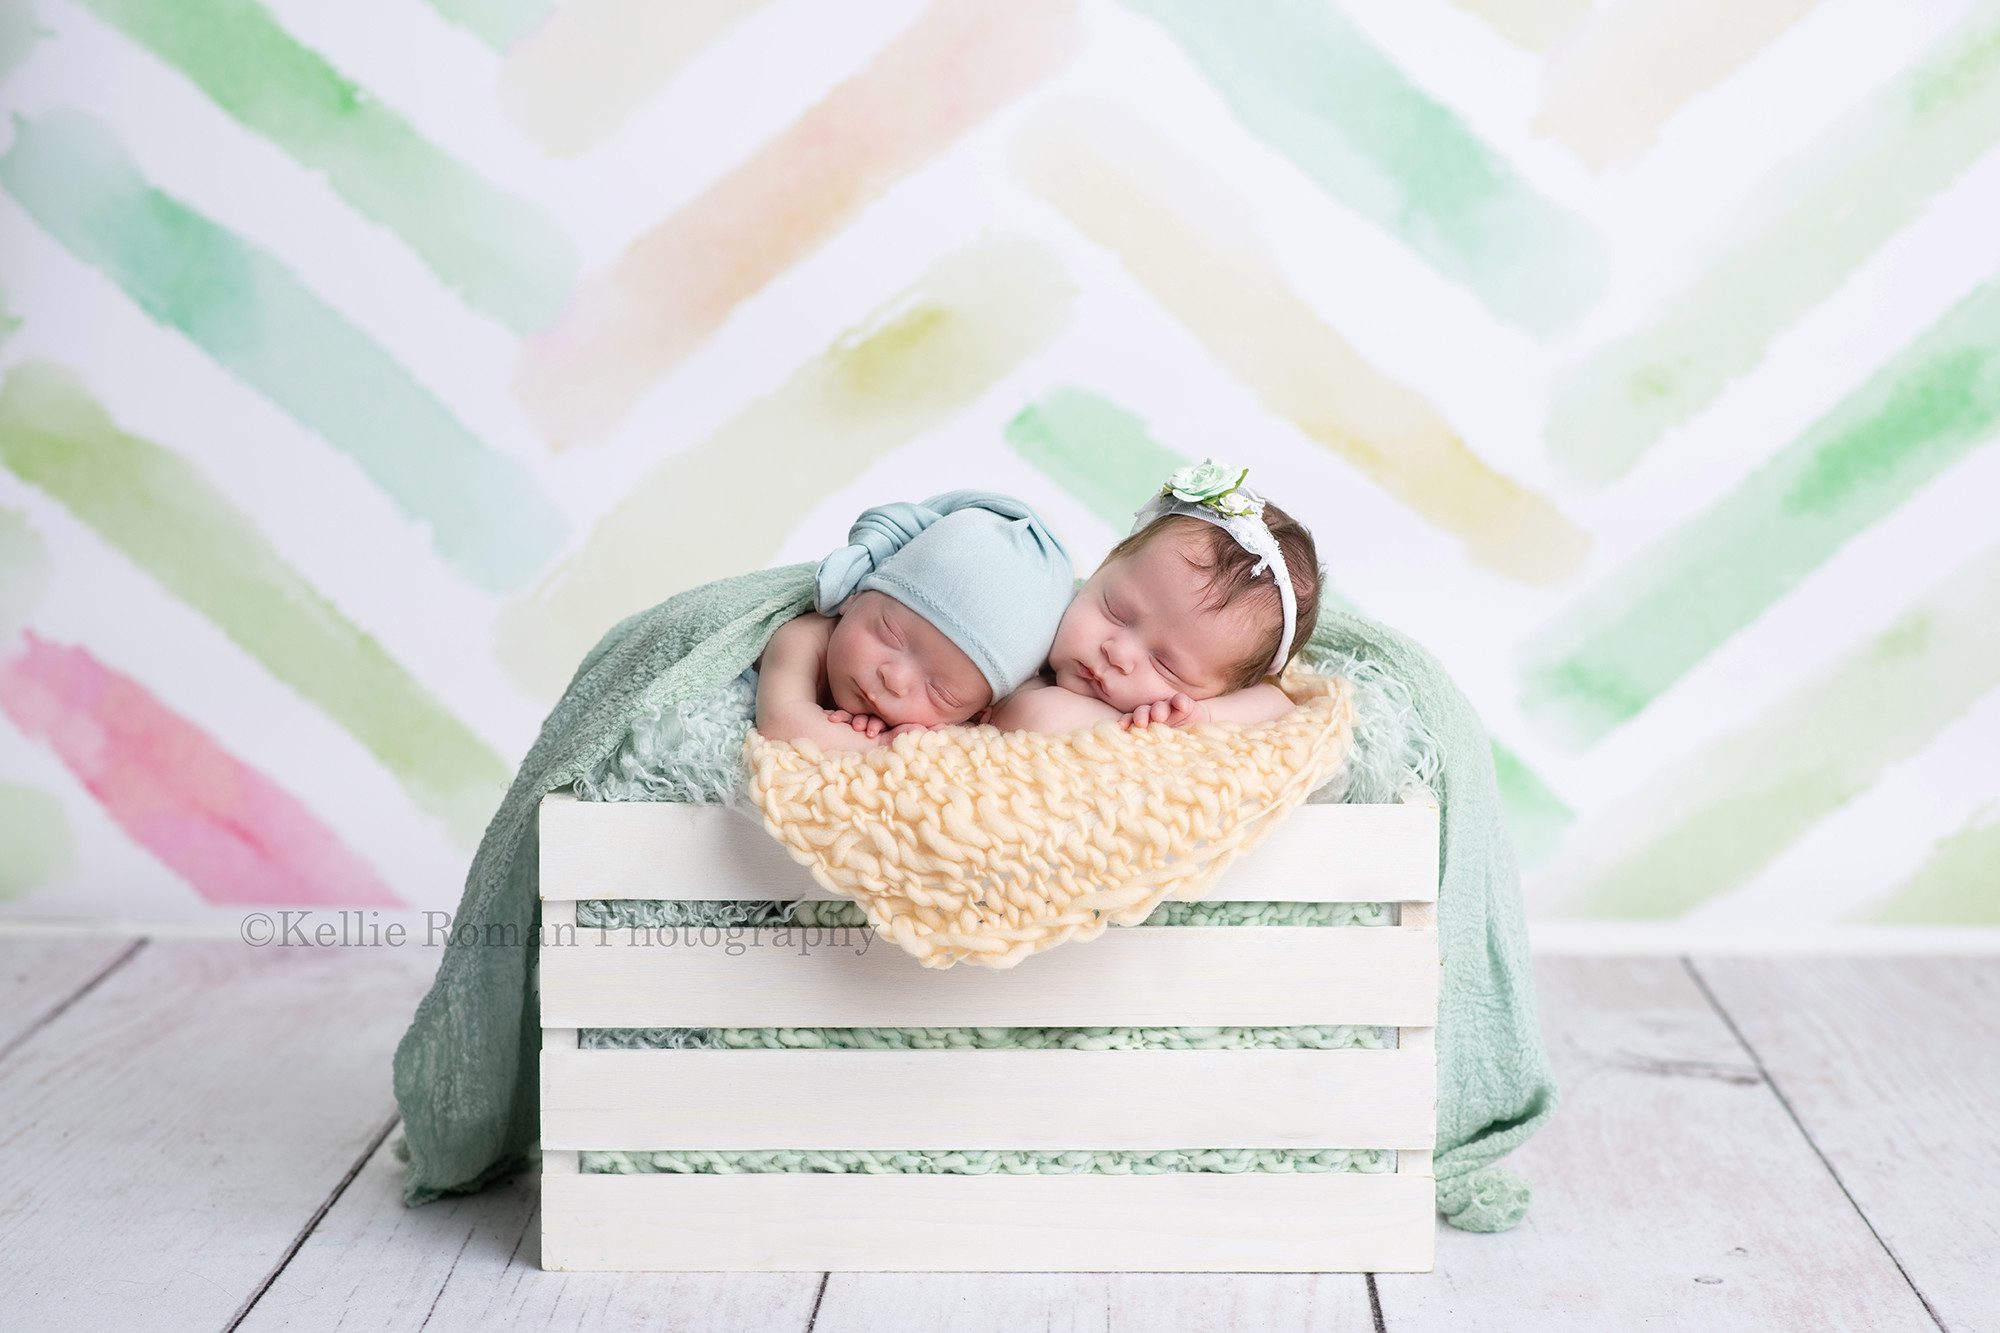 milwaukee twins a brother and newborn twin duo are being photographed in milwaukee Wisconsin photo studio they are posed upright with their chins resting on their arms in a white wood crate the crate is filled with yellow and teal stuffing they are on top of a white wood flooring and a pastel chevron backdrop the babies are both sleeping the girl has a flower headband on and the boy has a blue hat on